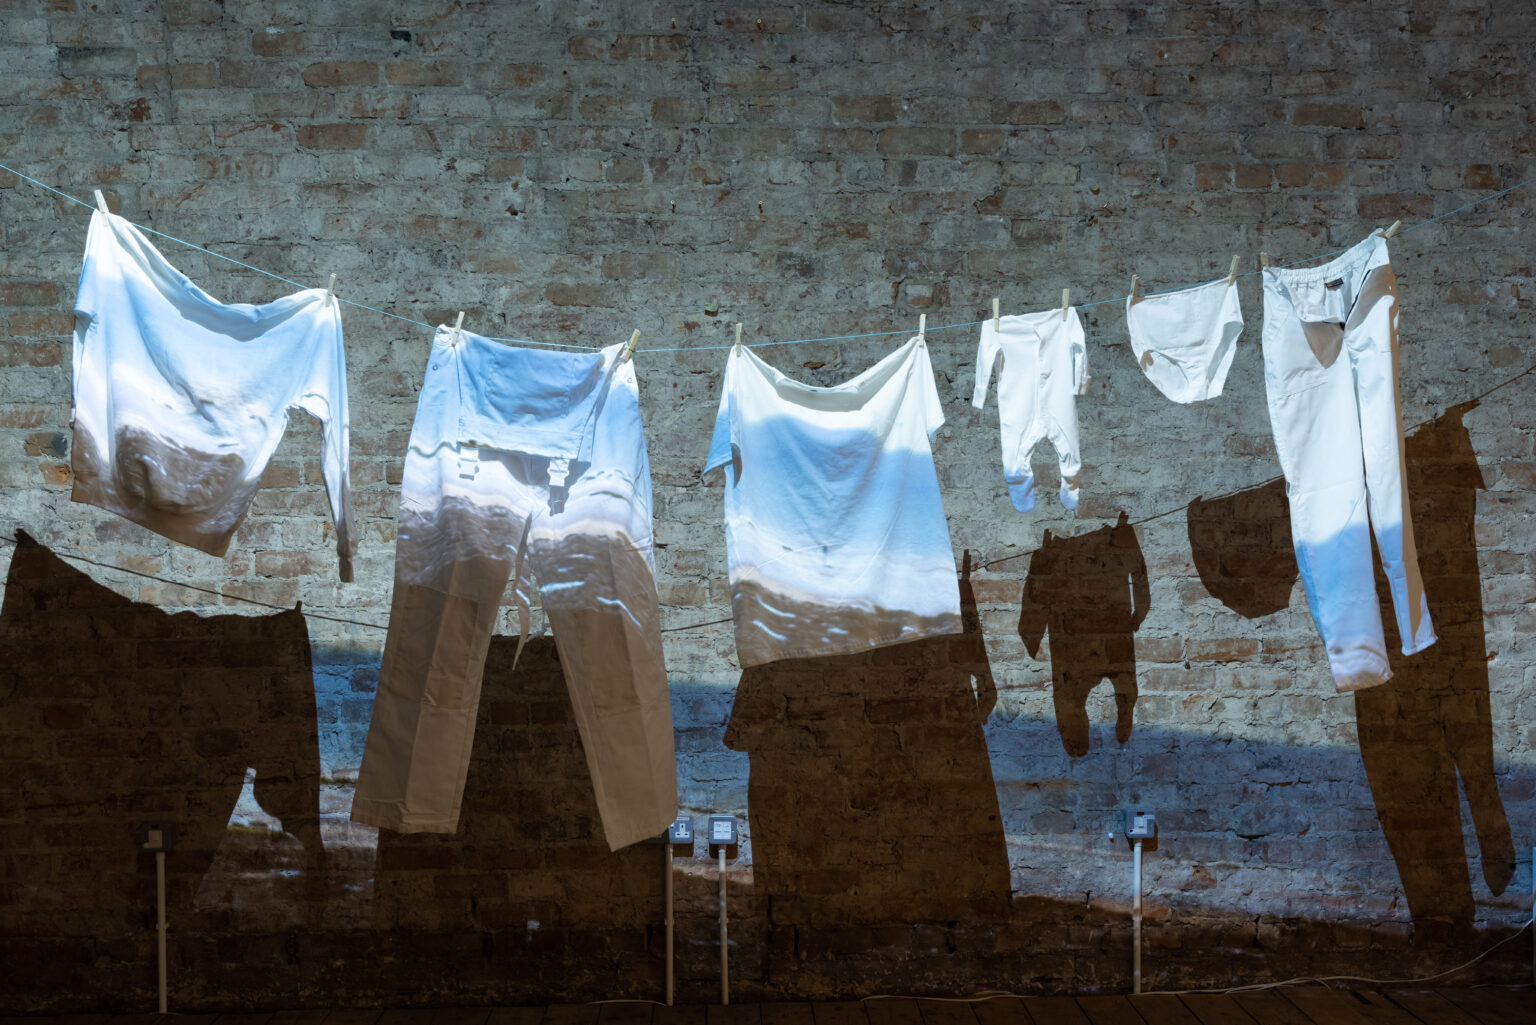 A washing line with white clothing hanging, in front of a brick wall